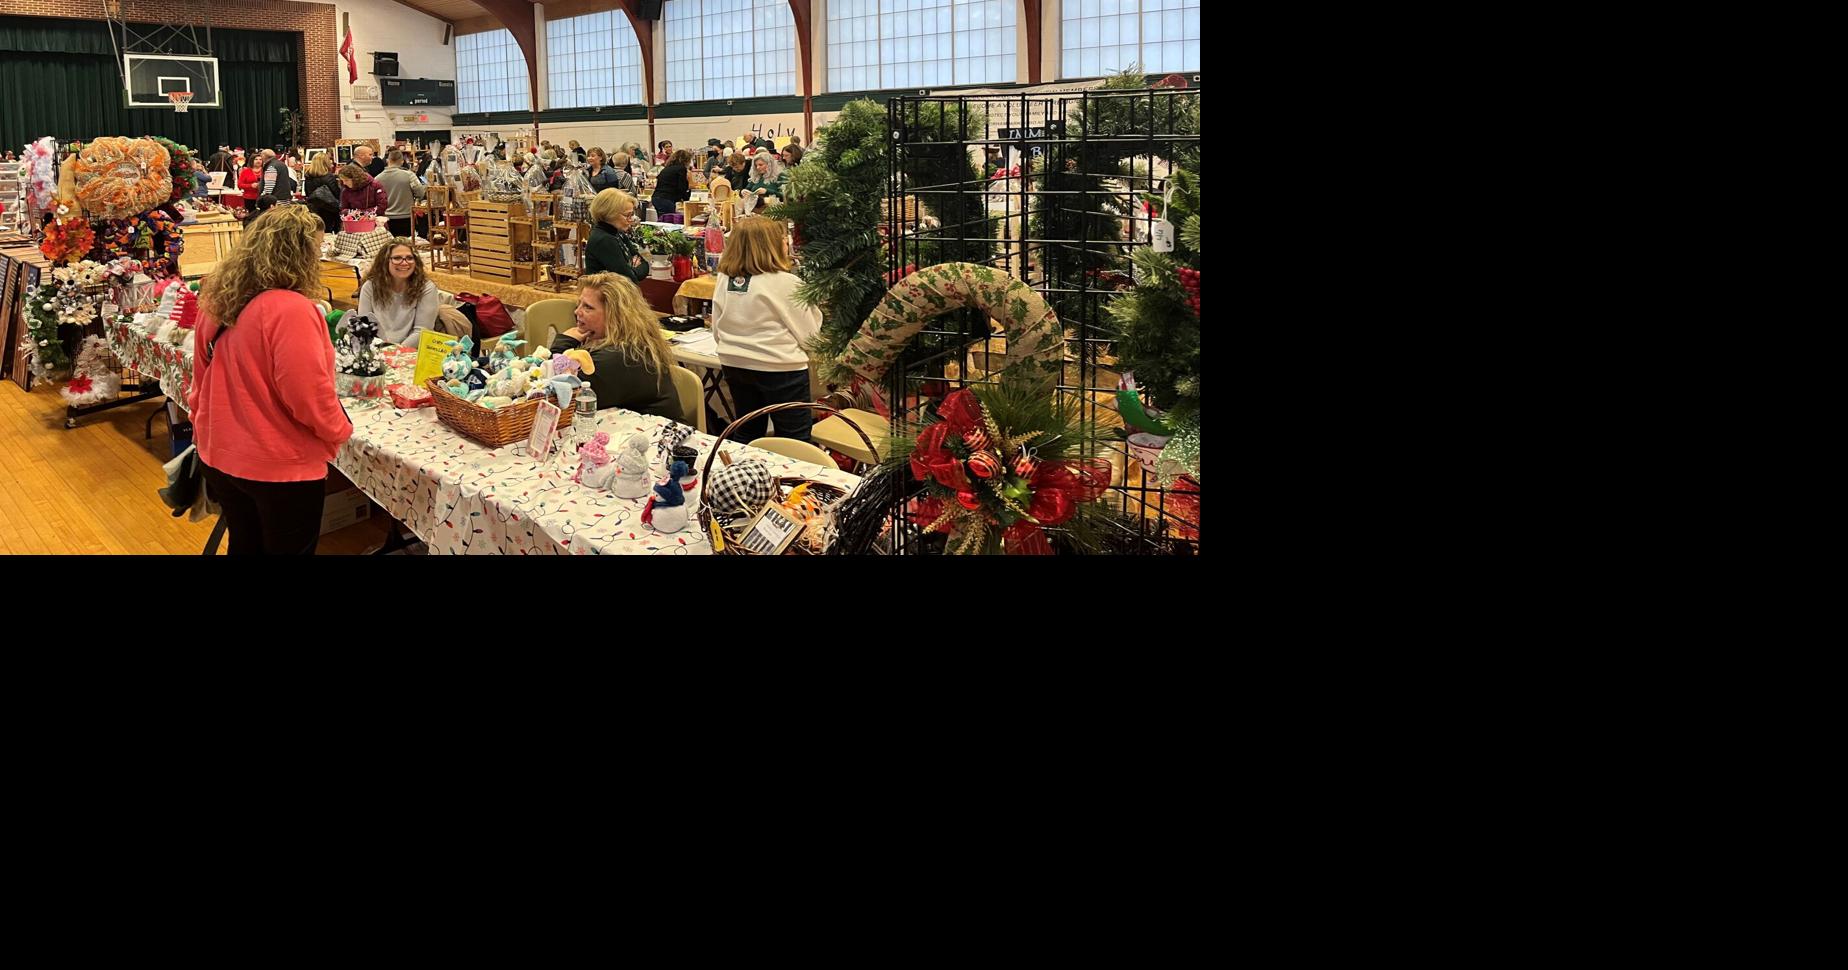 Holiday crafts abound at Holy Family Craft Fair in Florham Park